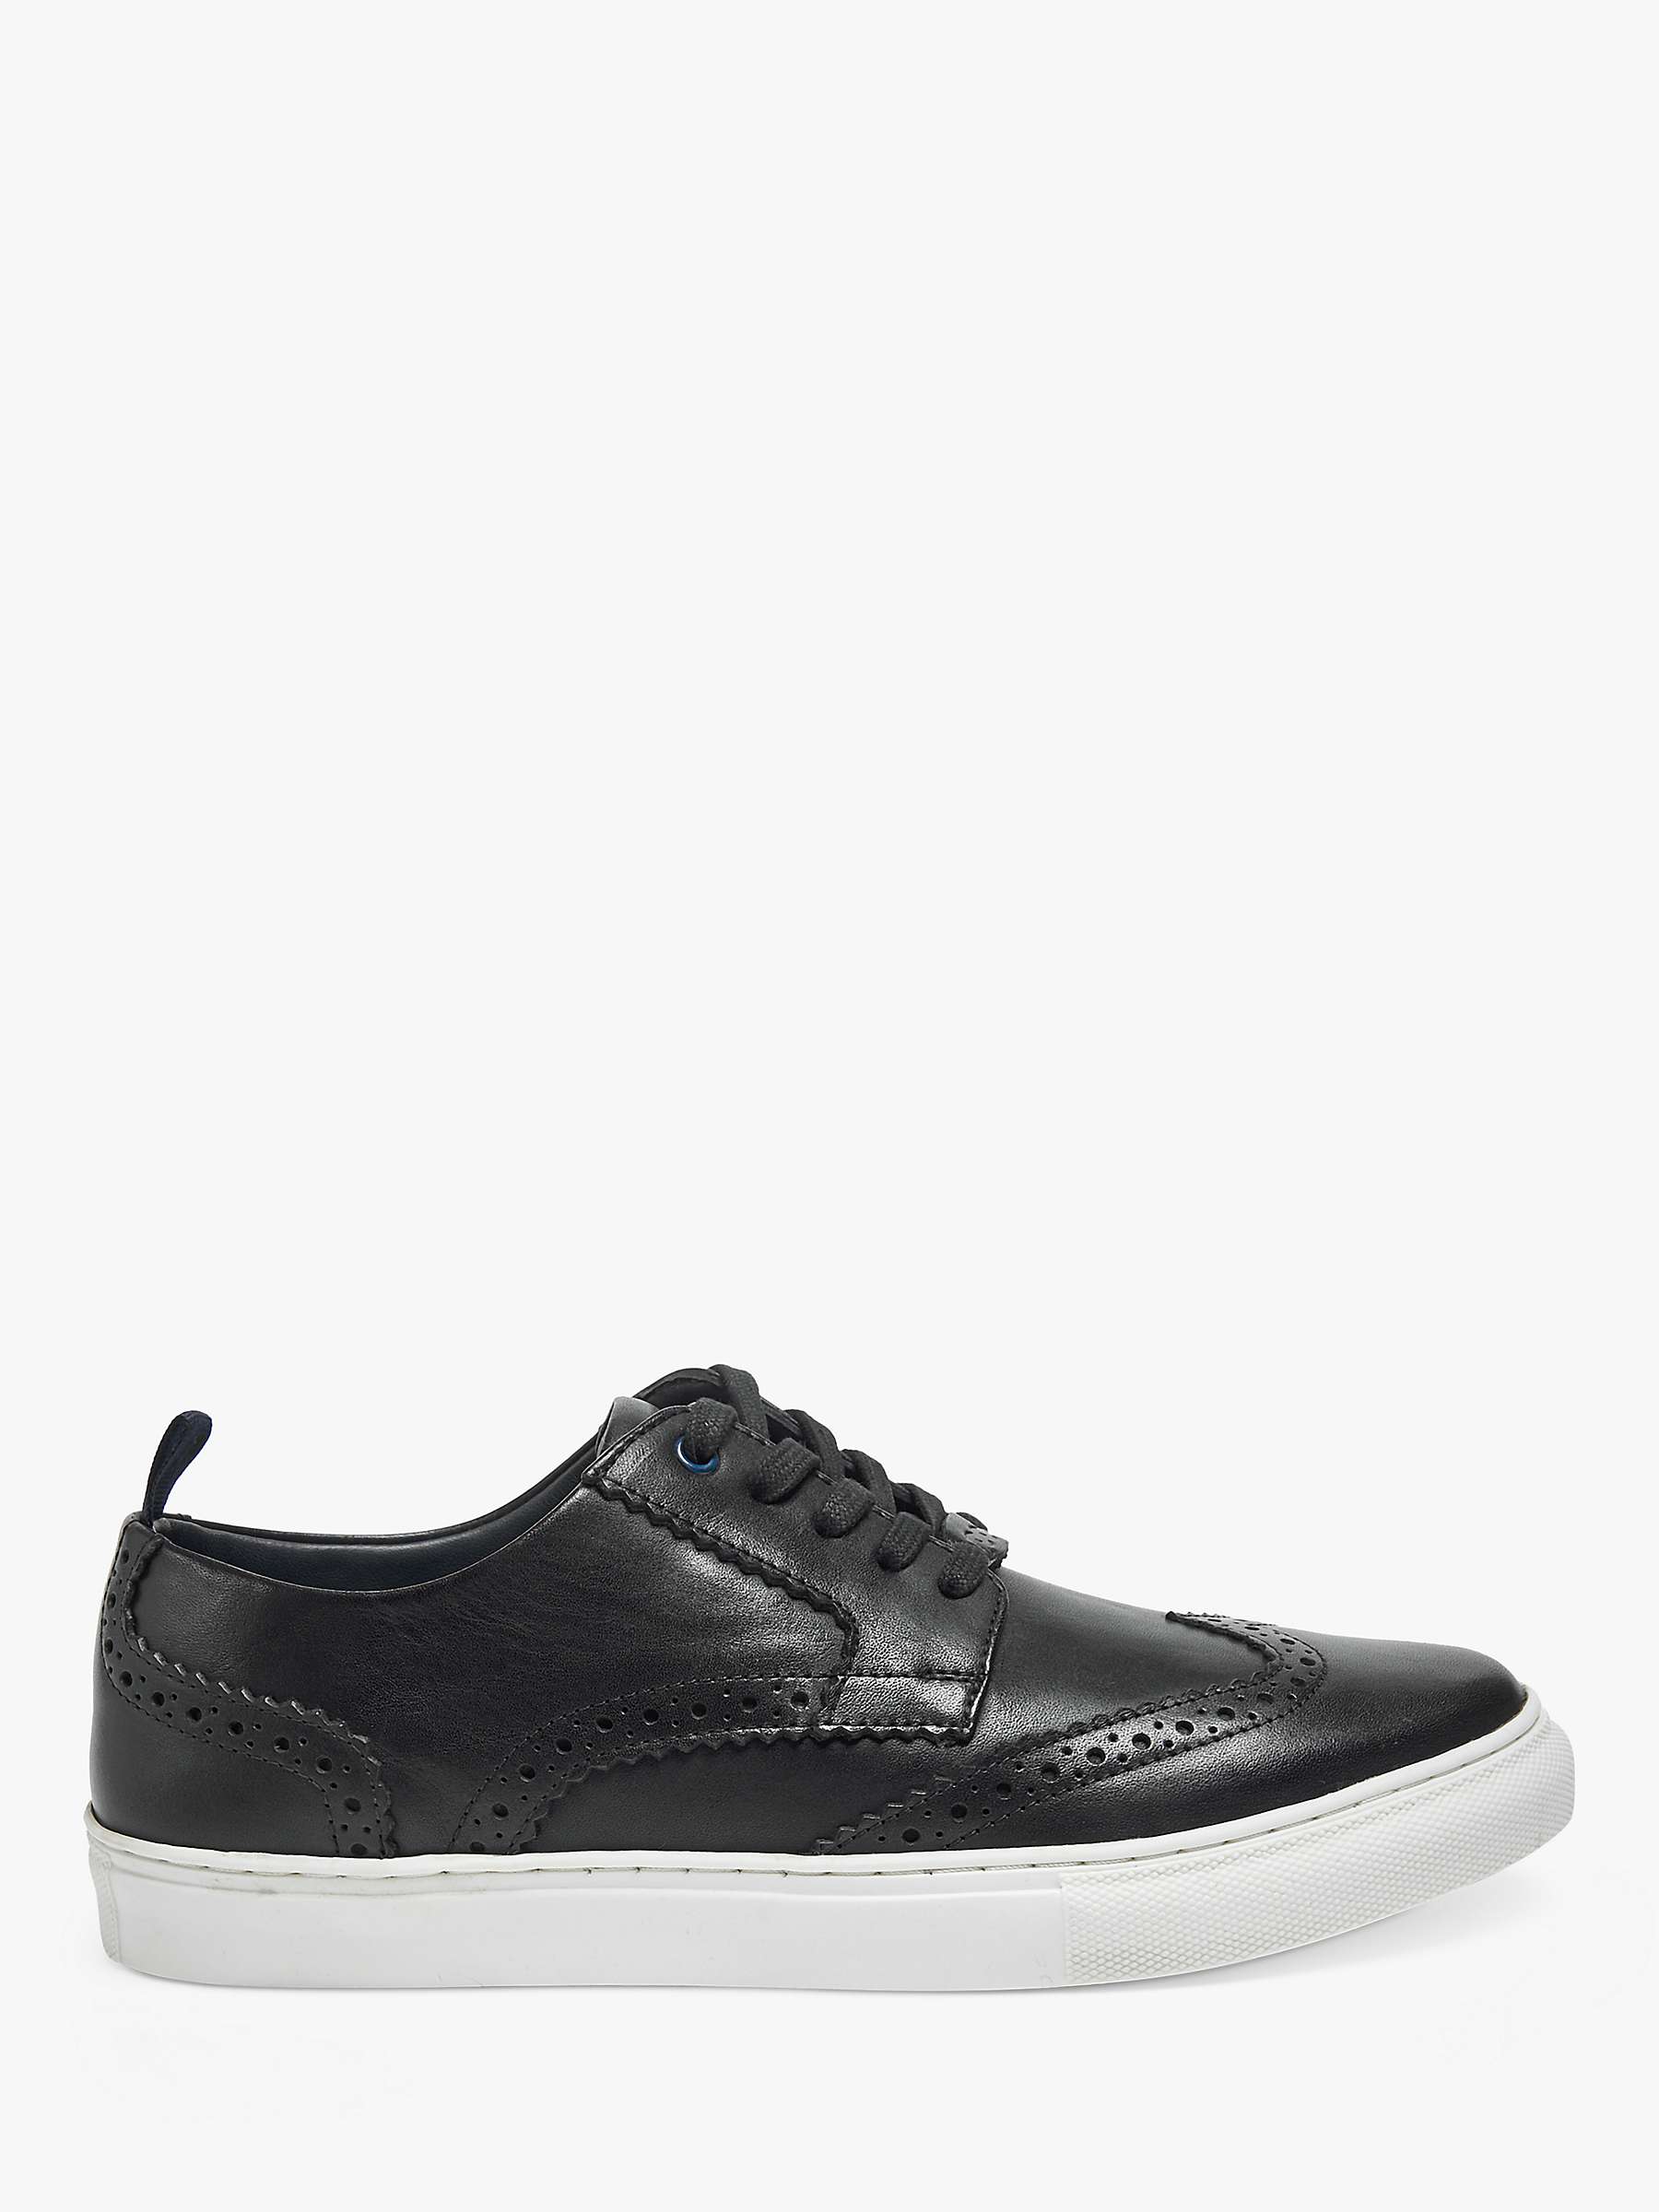 Buy Pod Foley Leather Brogue Trainers Online at johnlewis.com